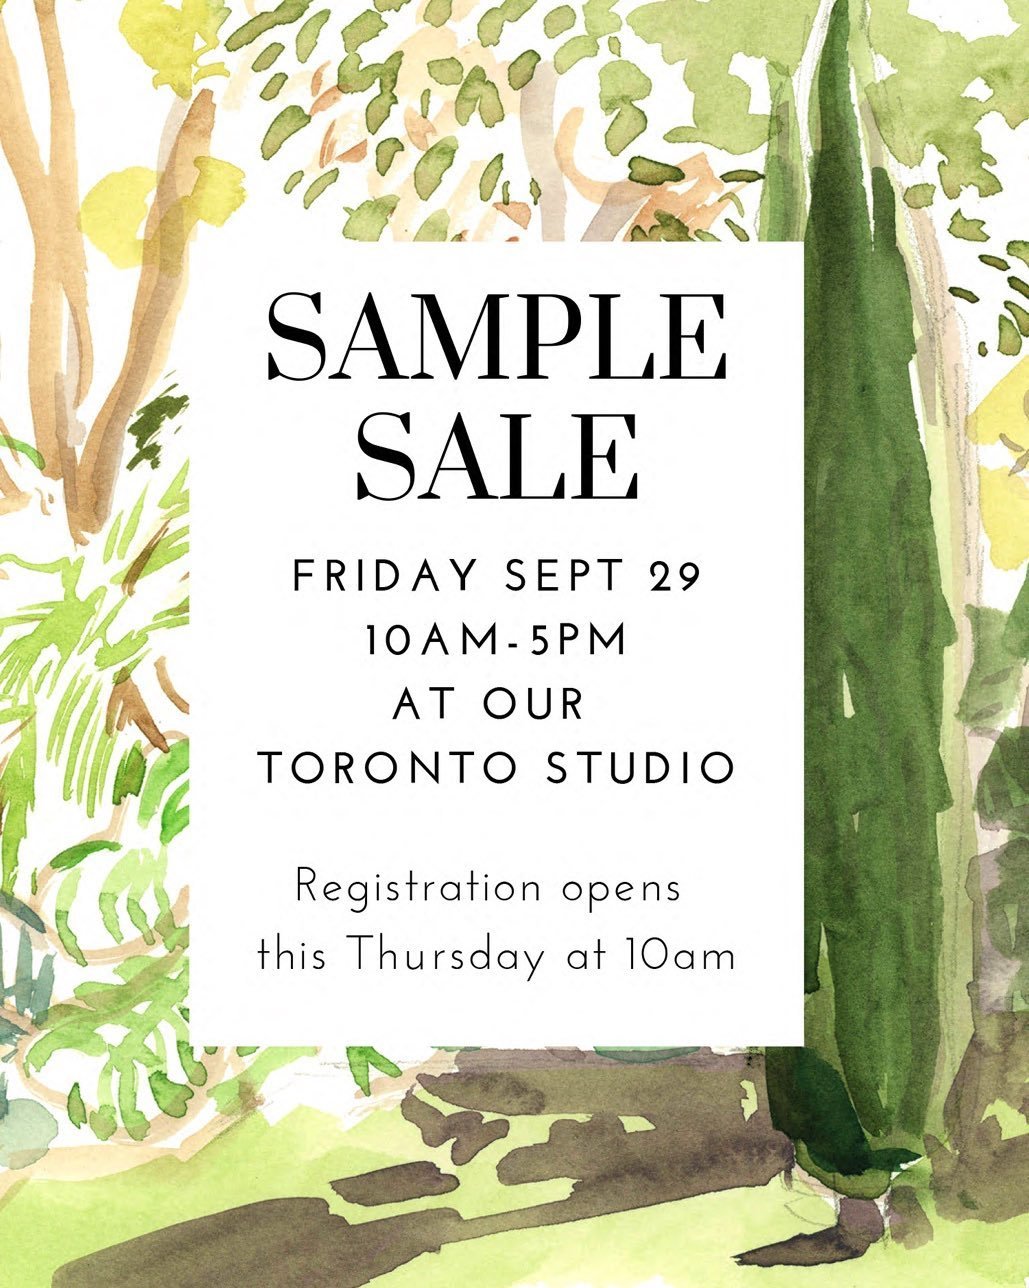 Our annual sample sale will take place at our Toronto studio next Friday September 29! Registration opens tomorrow at 10am.  Link will be posted in bio.  Or sign up for our newsletter and we&rsquo;ll send you an email!